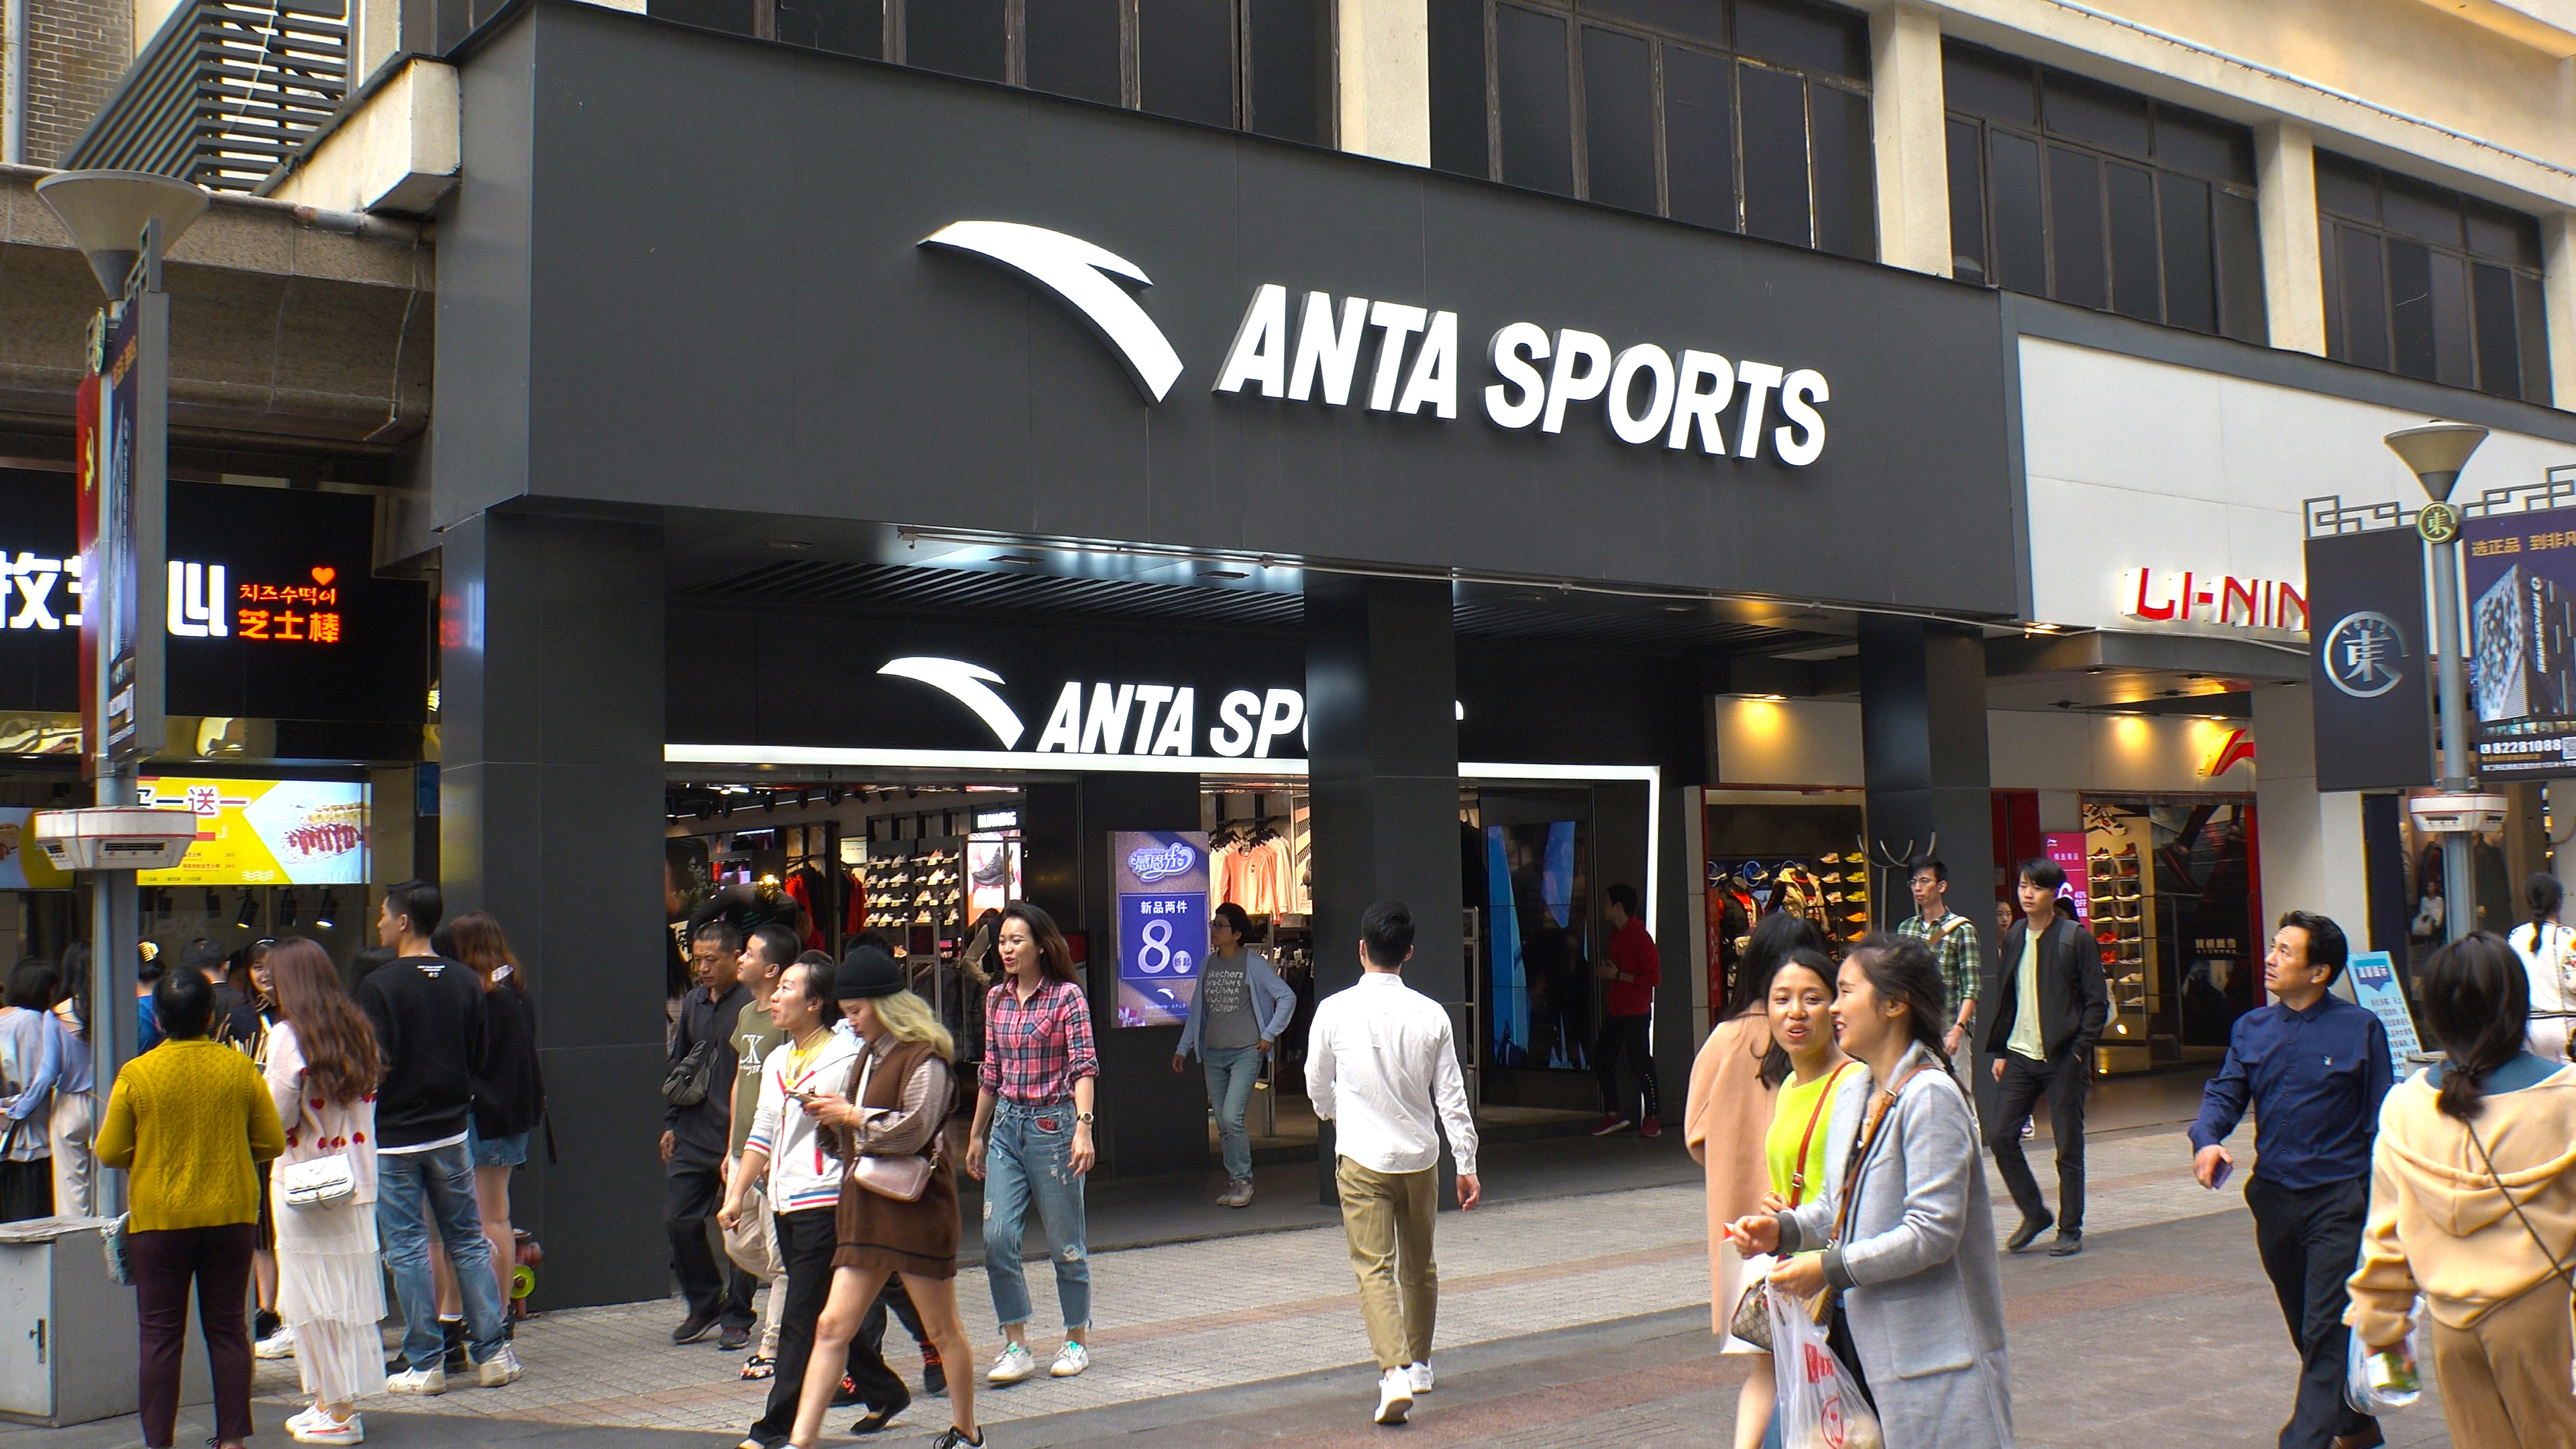 An Anta Sports store in Shenzhen in southern China on November 9, 2018. Photo: Shutterstock.